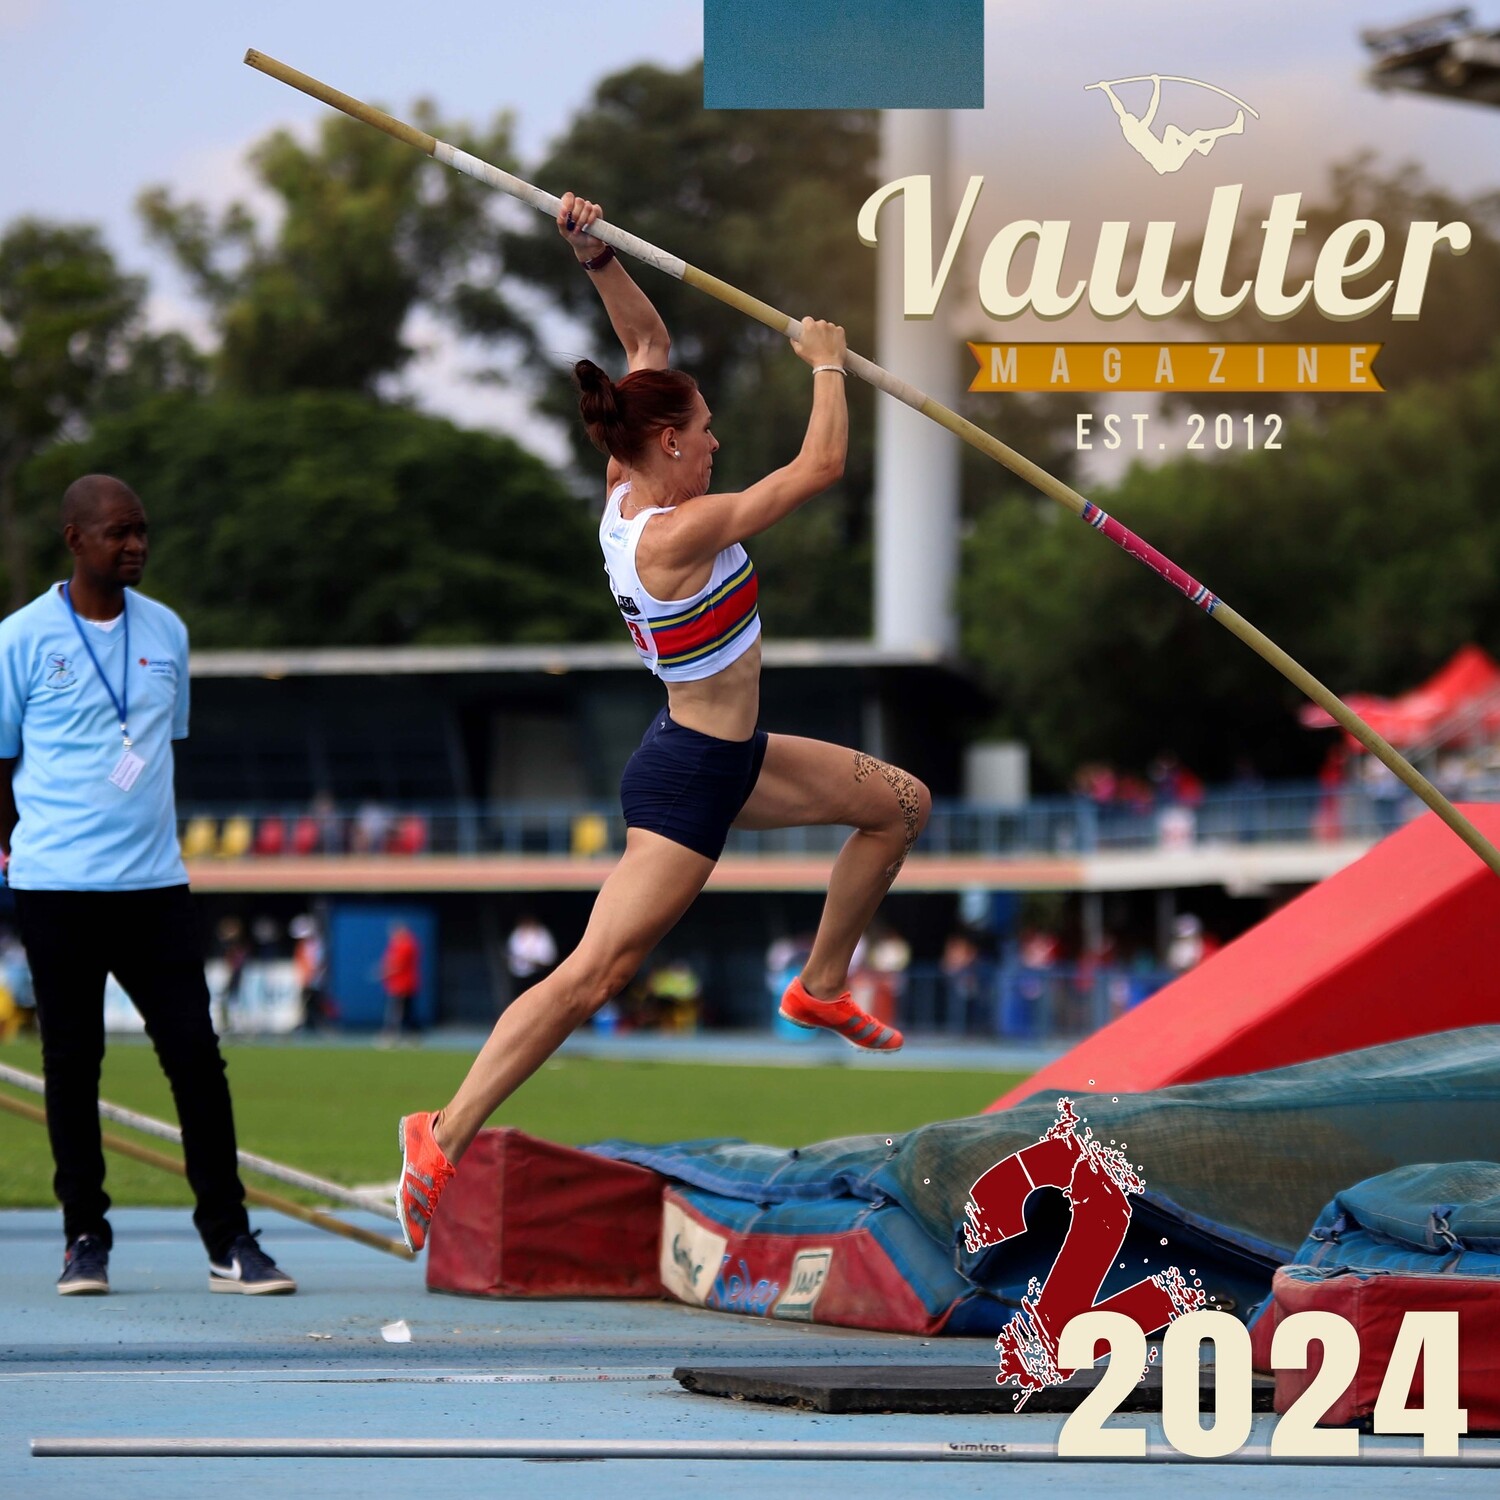 Otto Bjorn Vaulter Magazine in 2024  Get in shape, Pole vault, National  title